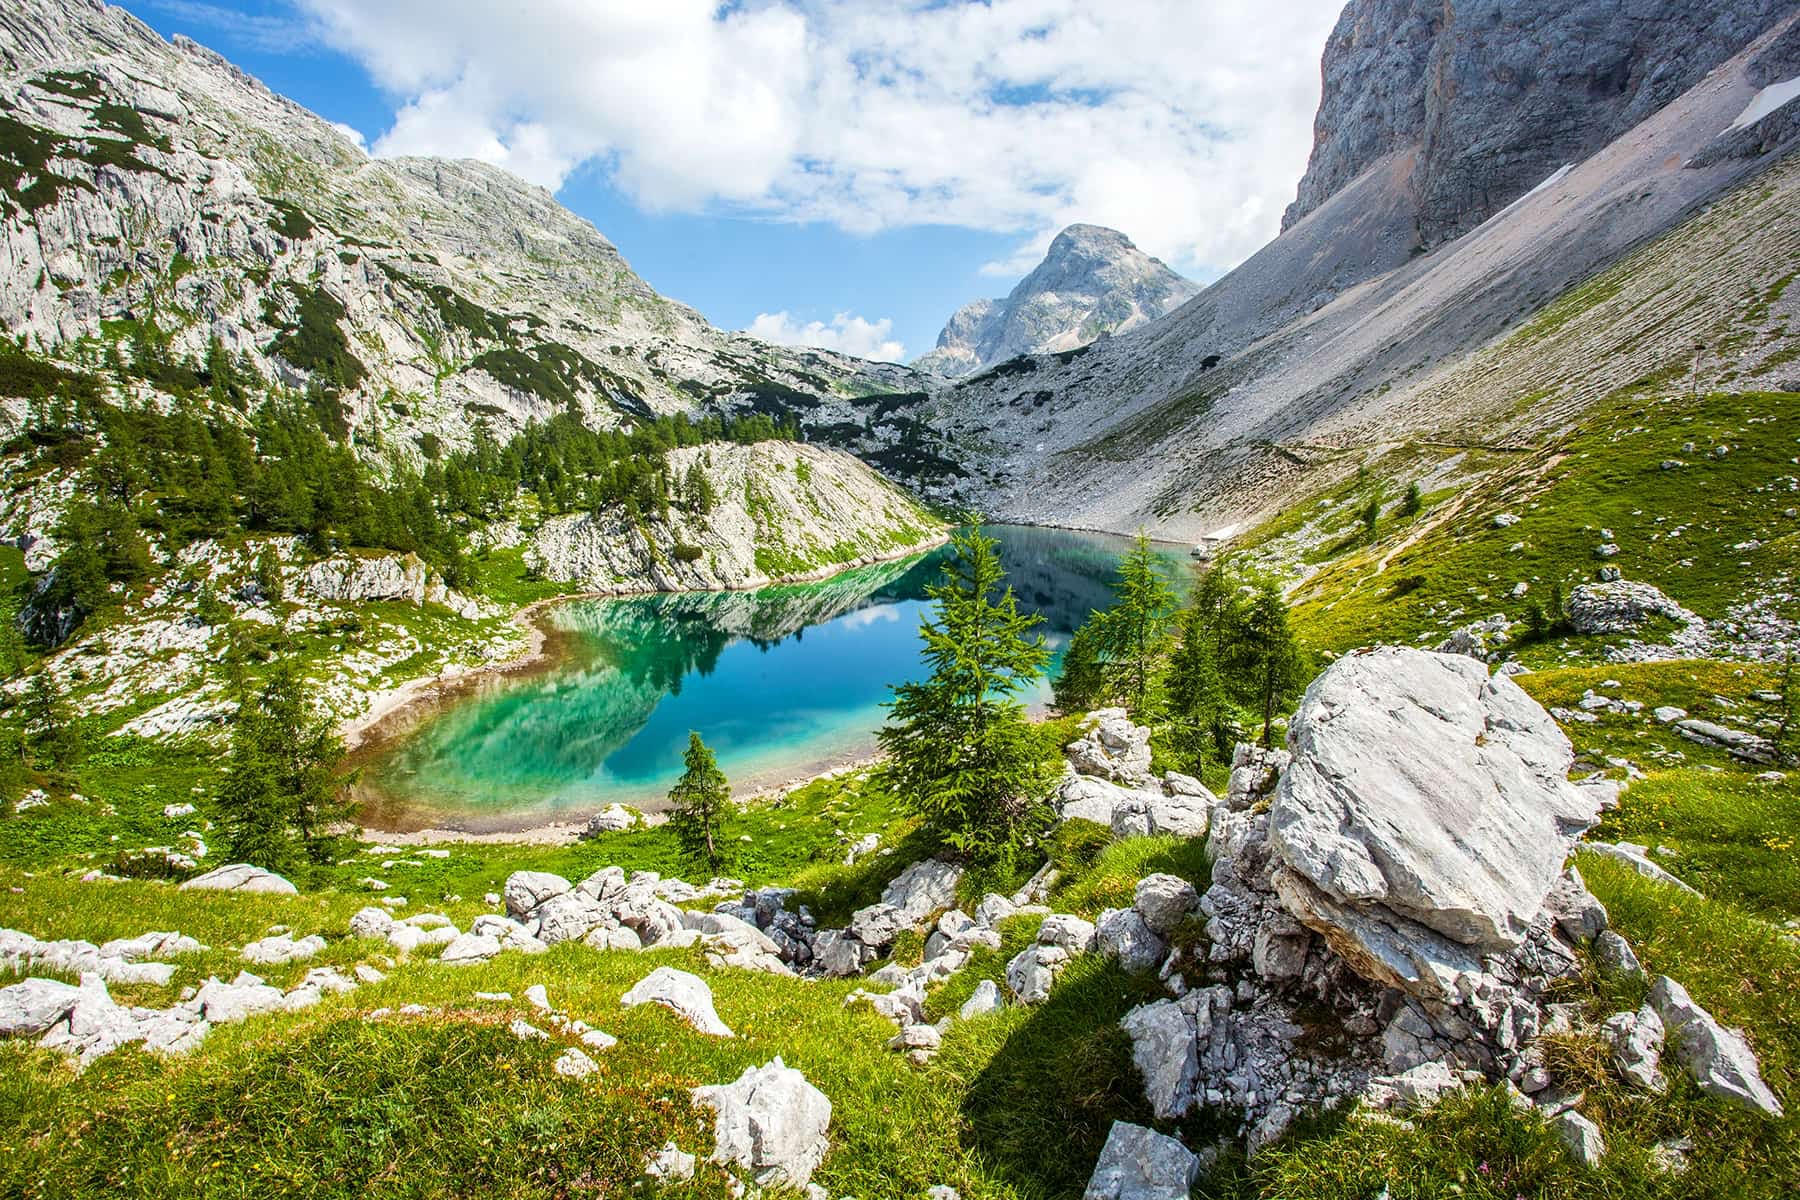 Just one of the turquoise lakes in the high peaks of the Julian Alps. Photo: Getty